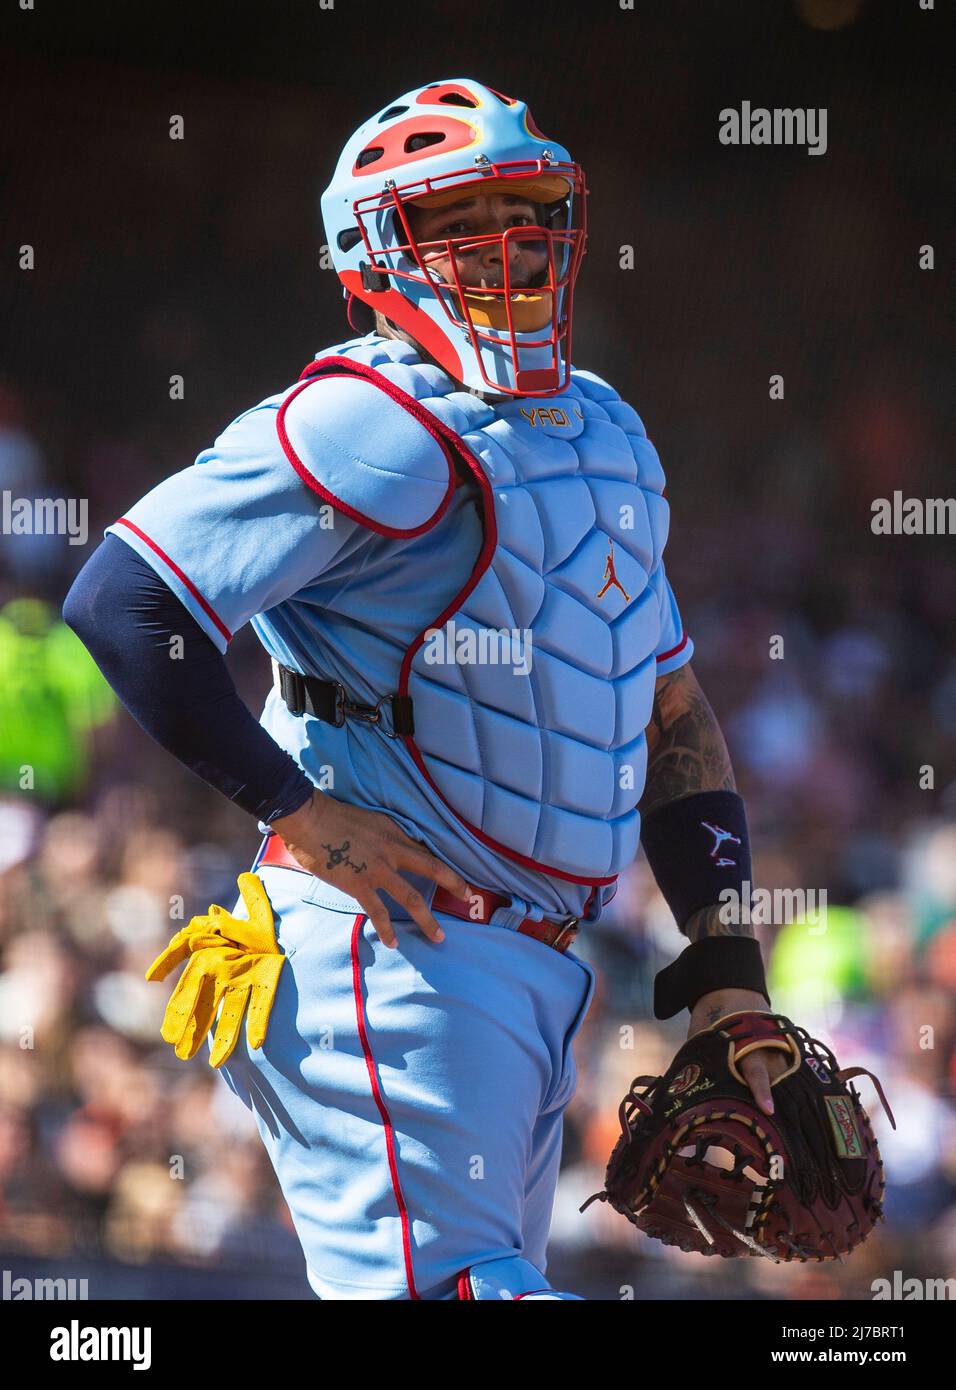 May 07 2022 San Francisco CA, U.S.A. St. Louis catcher Yadier Molina (4)  reacts after an infield out during MLB game between the St. Louis Cardinals  and the San Francisco Giants. The